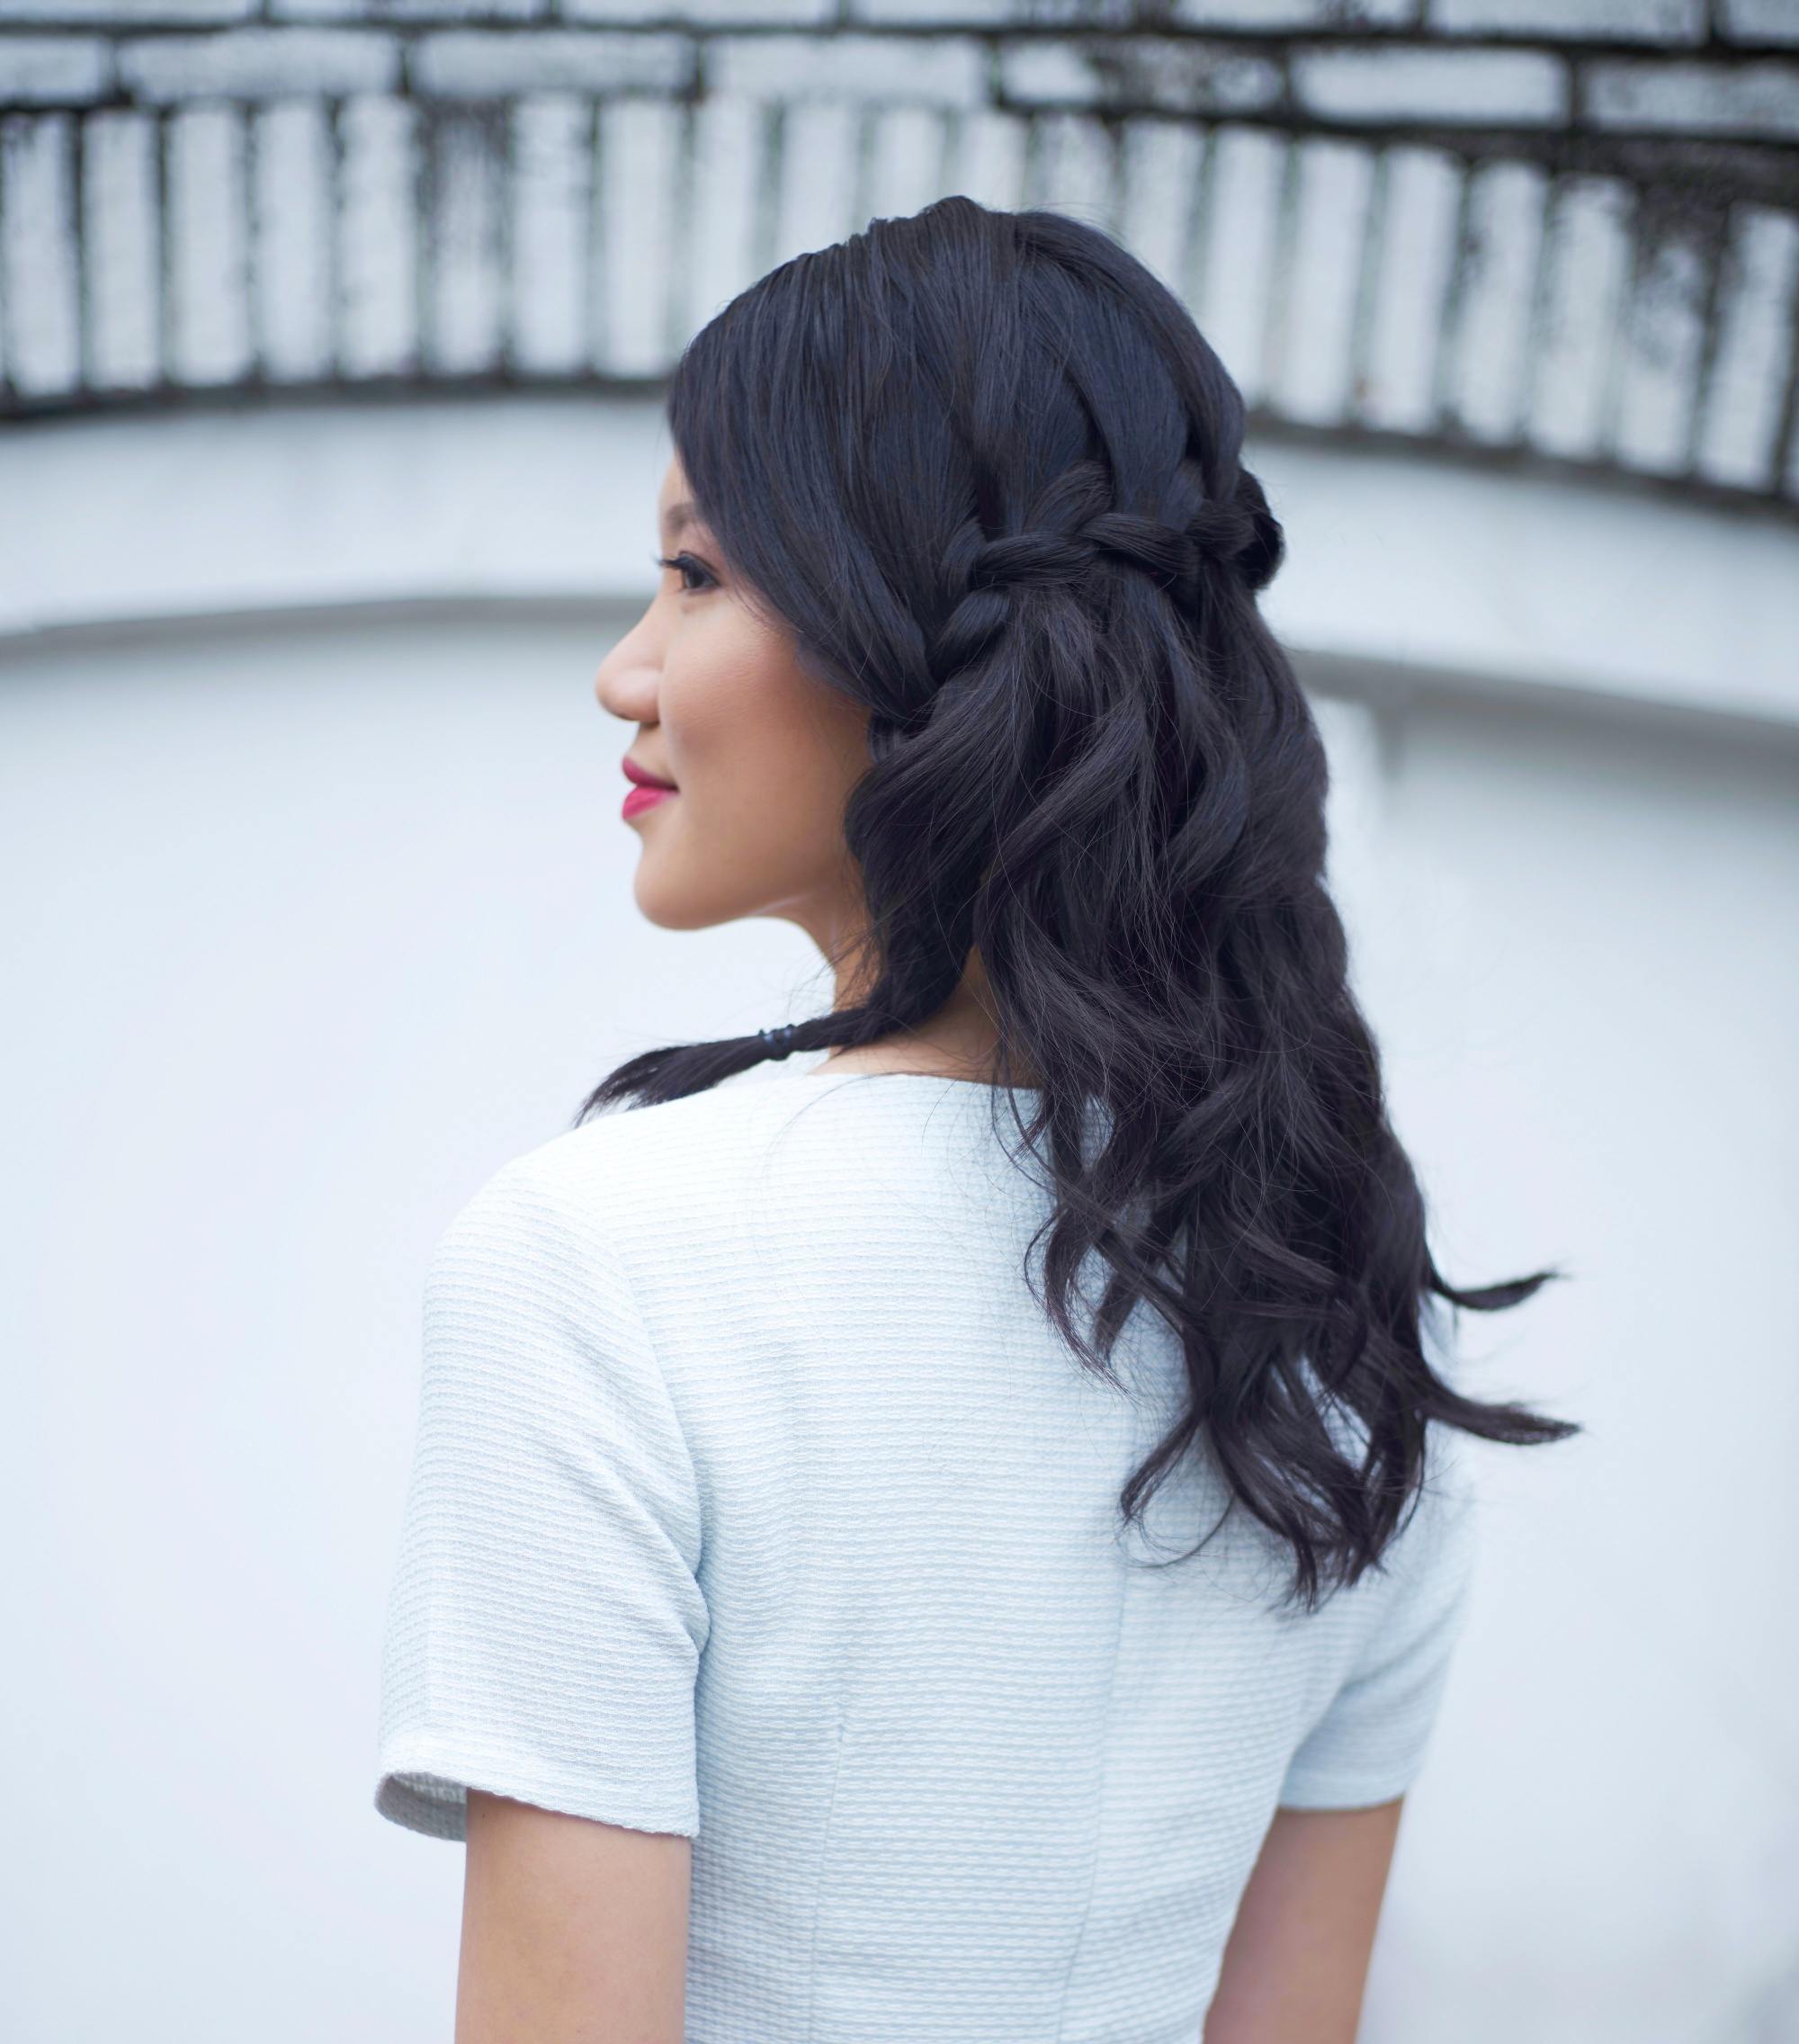 21 Most Glamorous Prom Hairstyles to Enhance Your Beauty – Hottest Haircuts